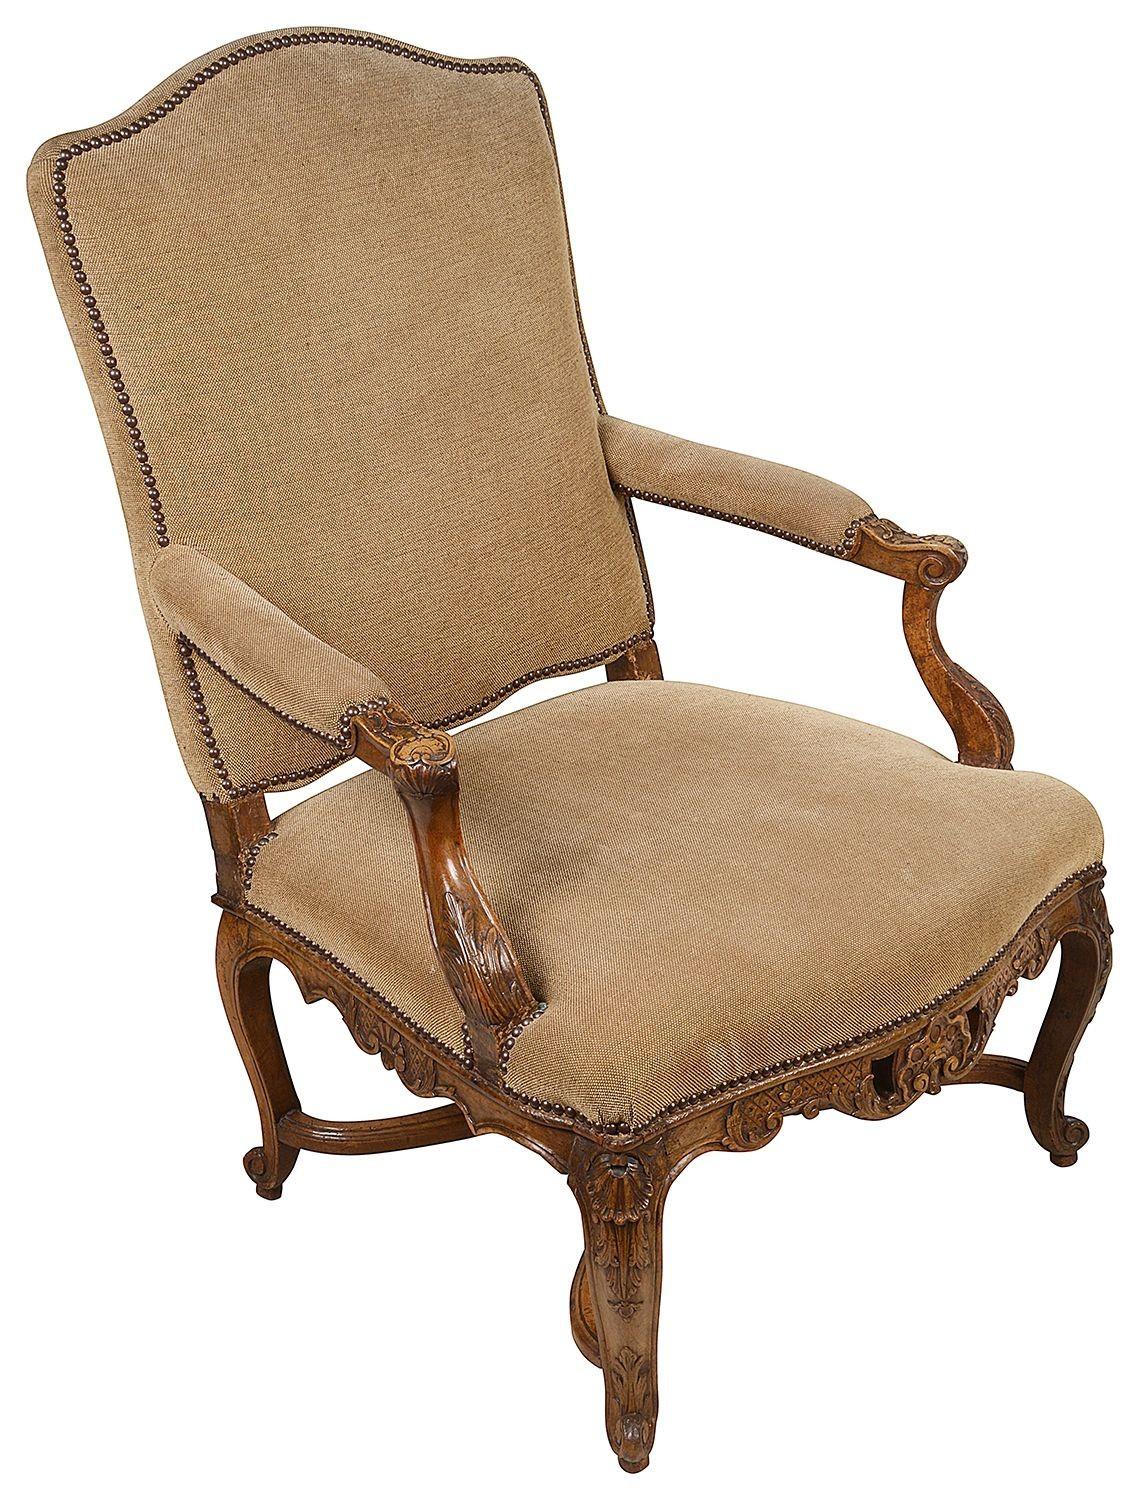 A very good quality pair of French 18th century carved walnut Bergere arm chairs, circa 1780.